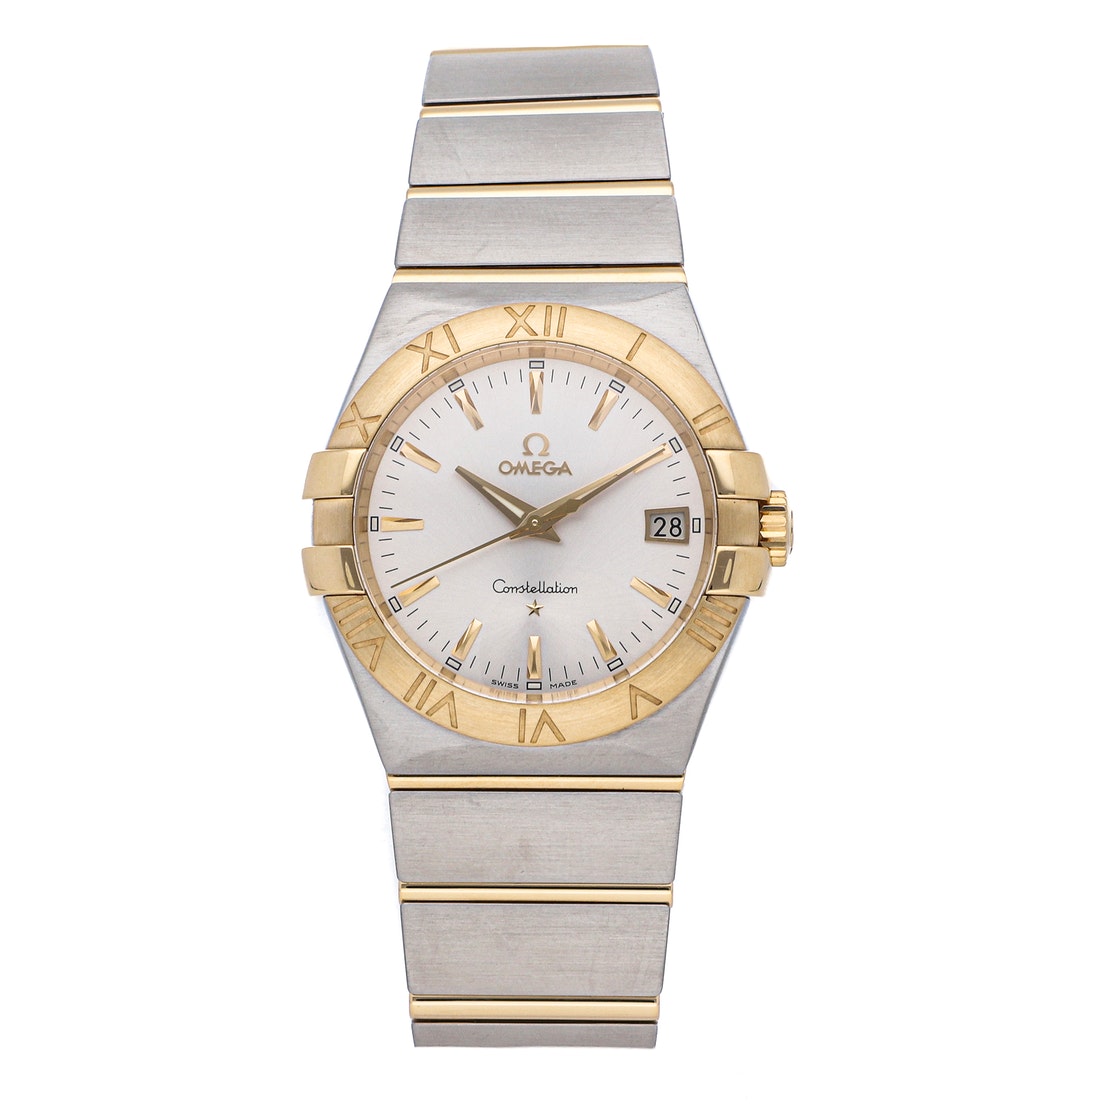 Pre-owned Omega Silver 18k Yellow Gold And Stainless Steel Constellation 123.20.35.60.02.002 Men's Wristwatch 35 Mm